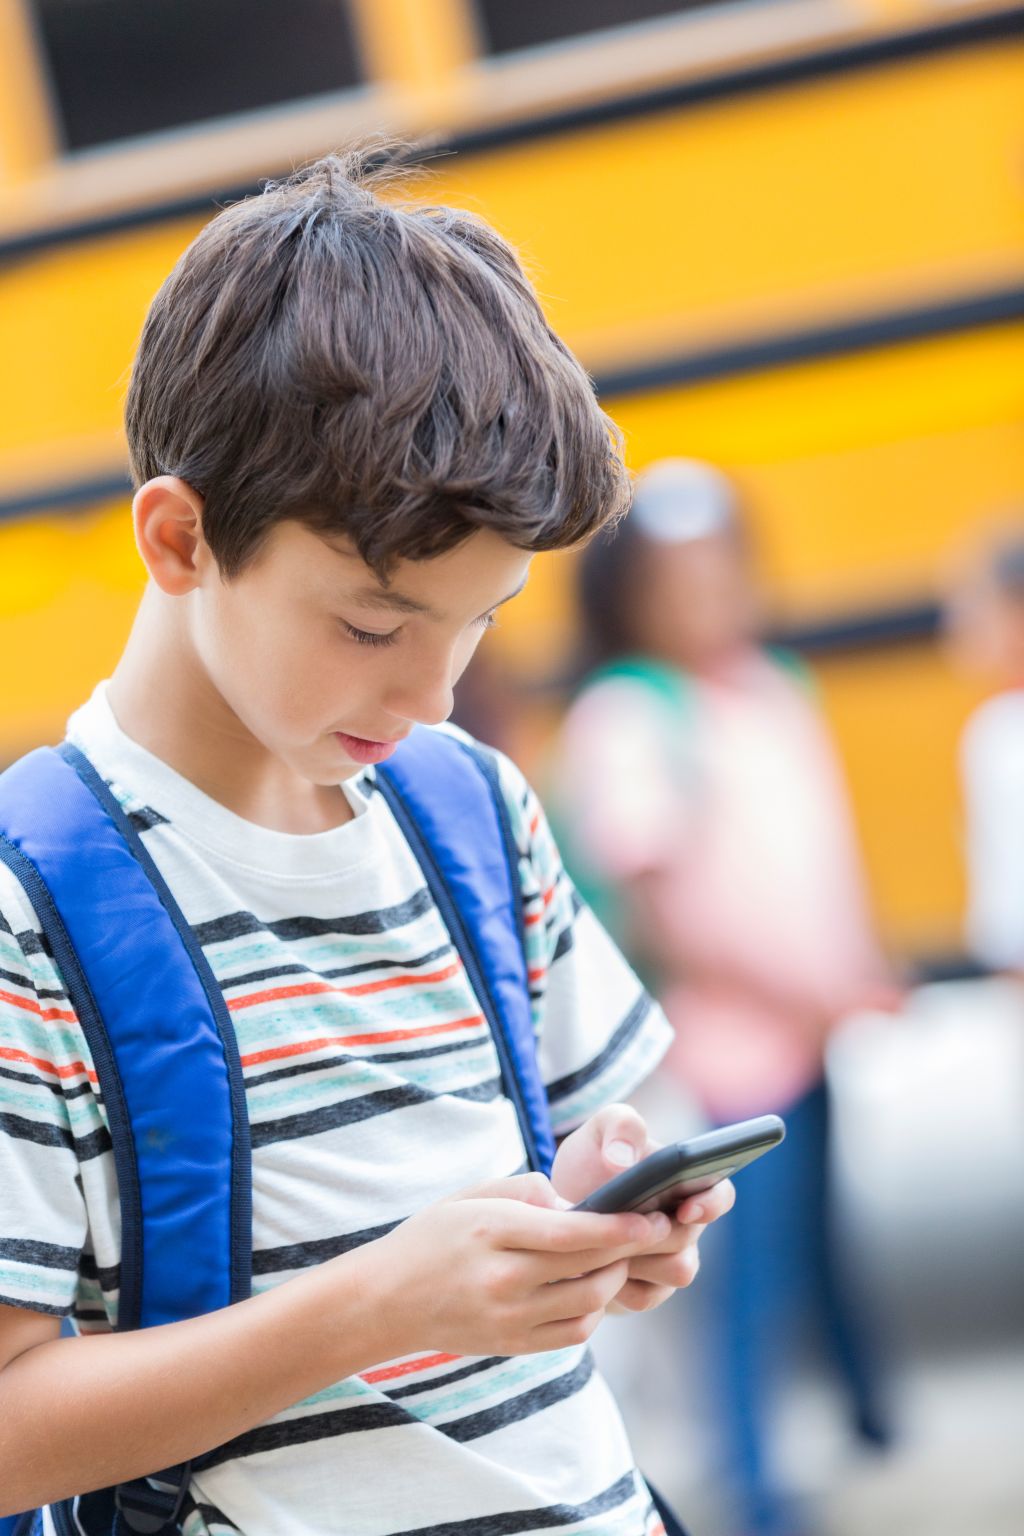 Schoolboy uses smart phone while waiting for bus